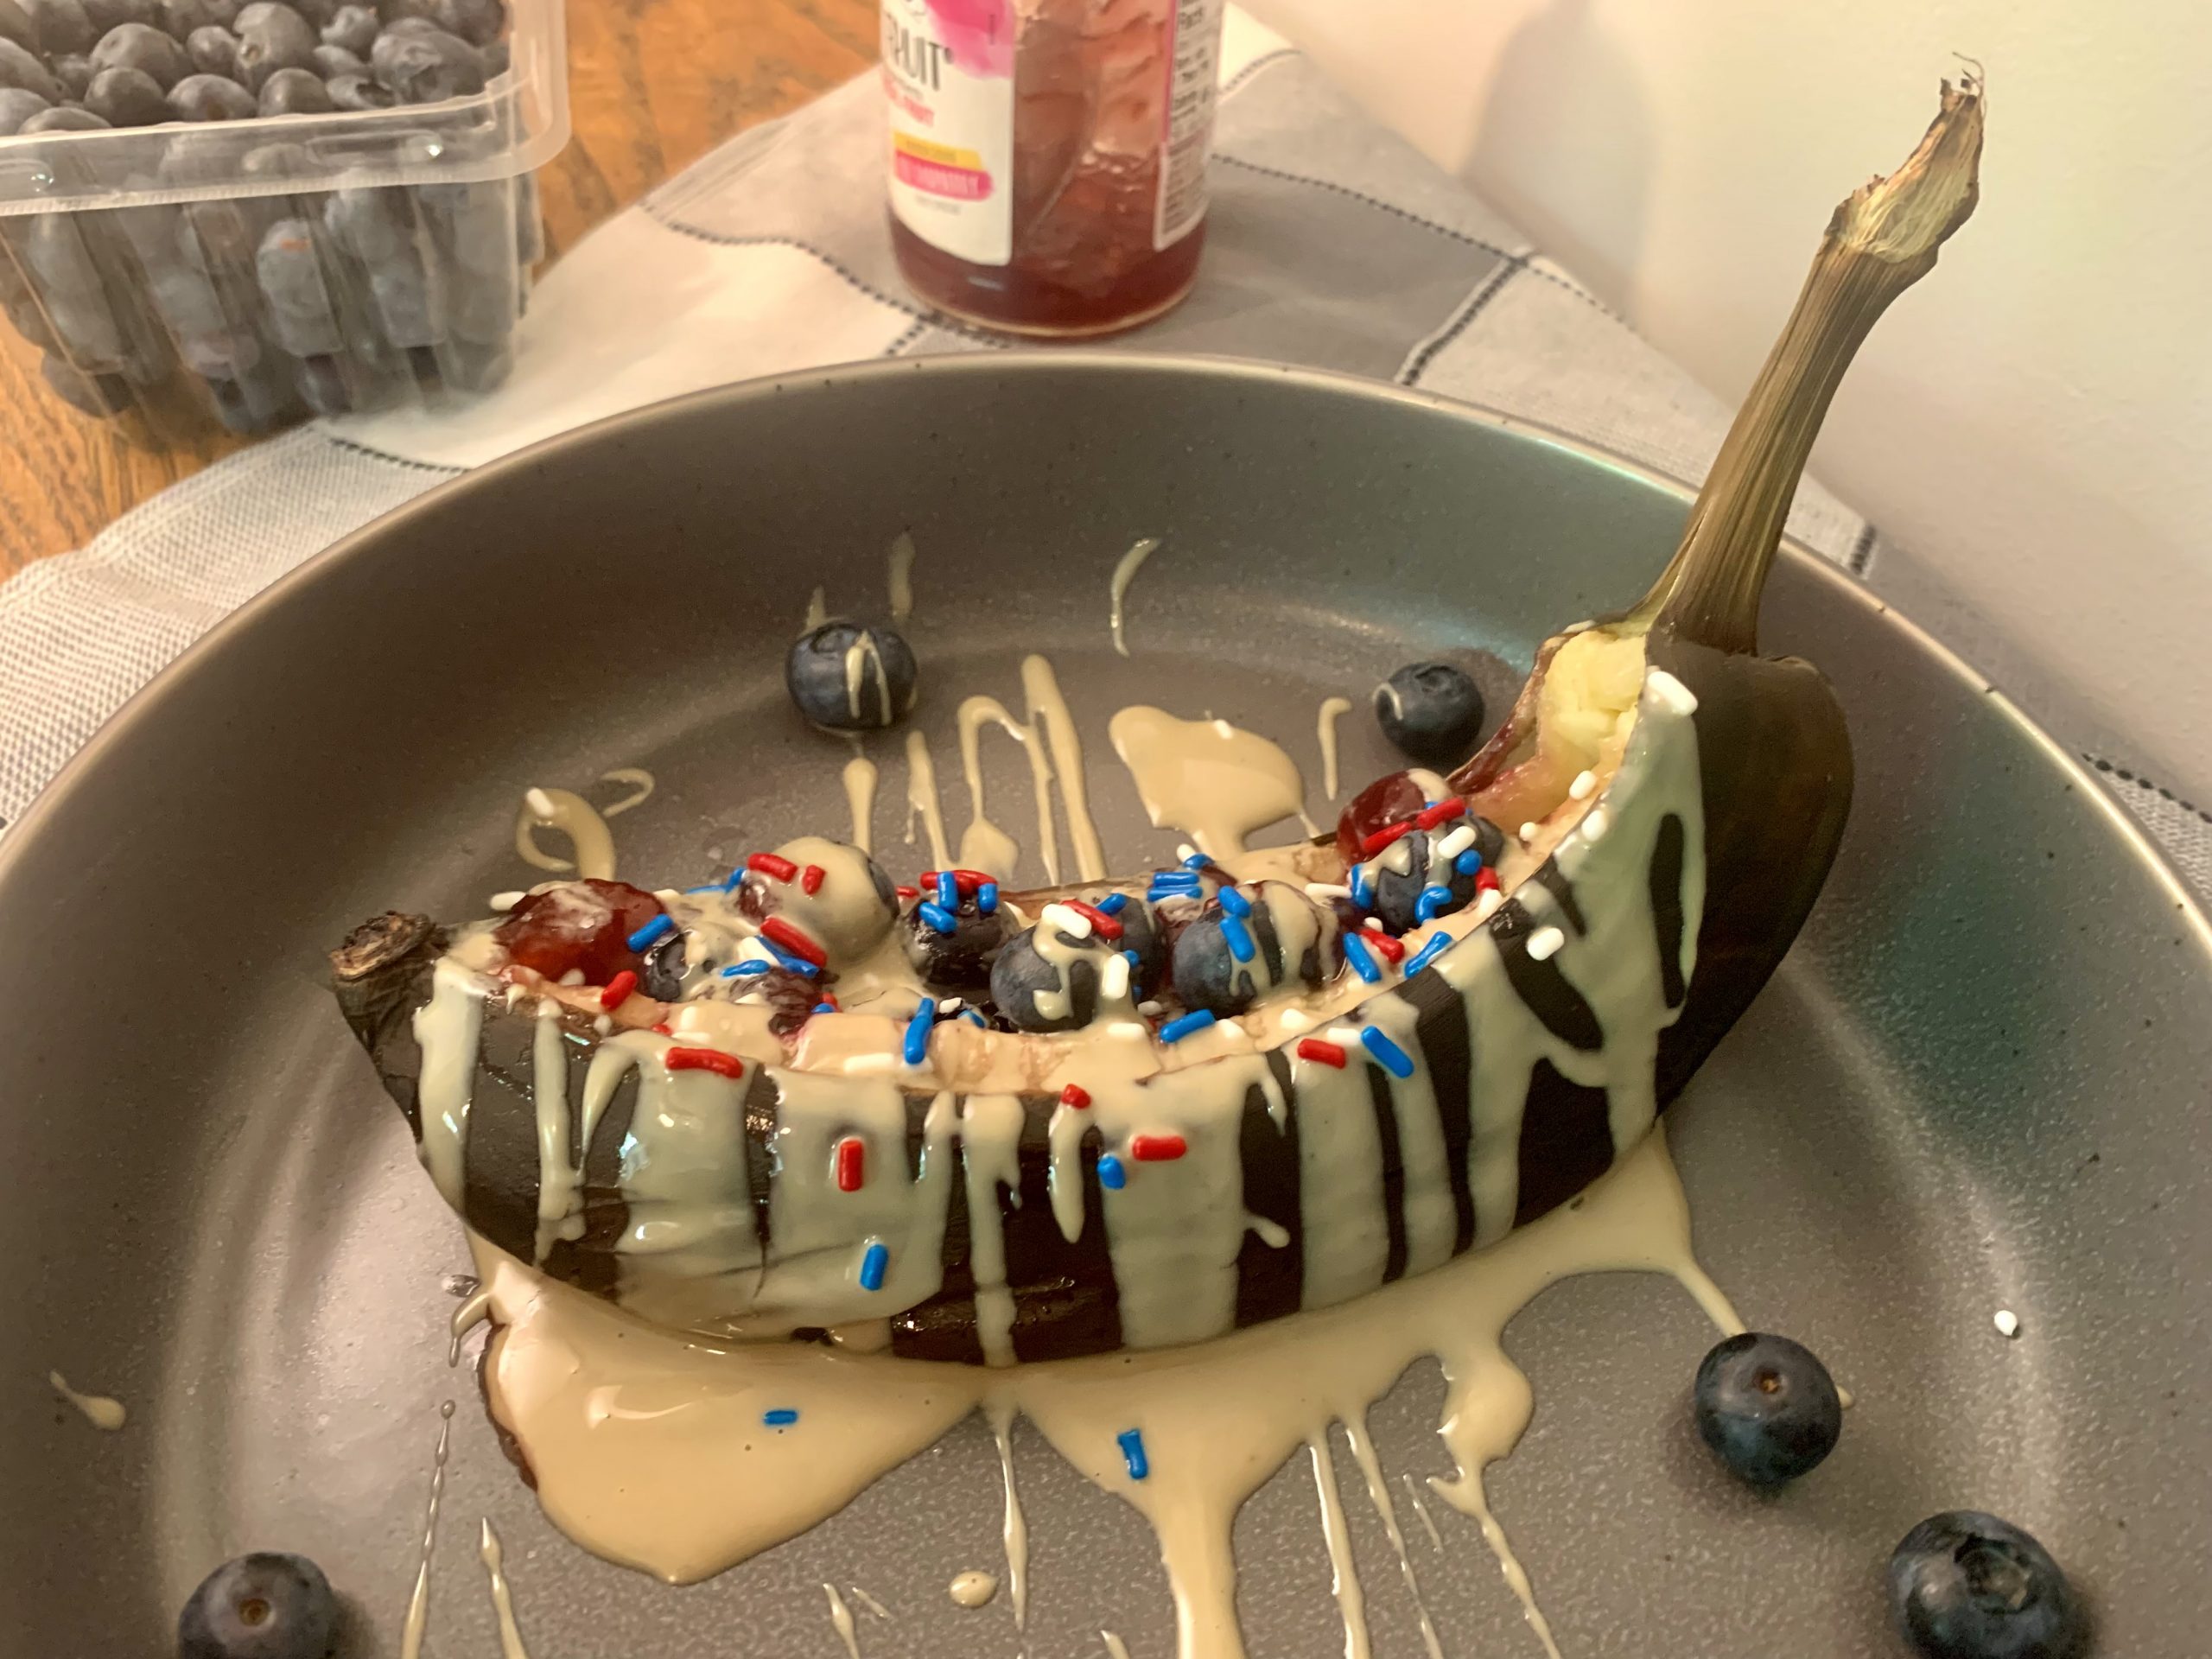 Red, White, and Blue Banana Boats (w/ Campfire Option!)